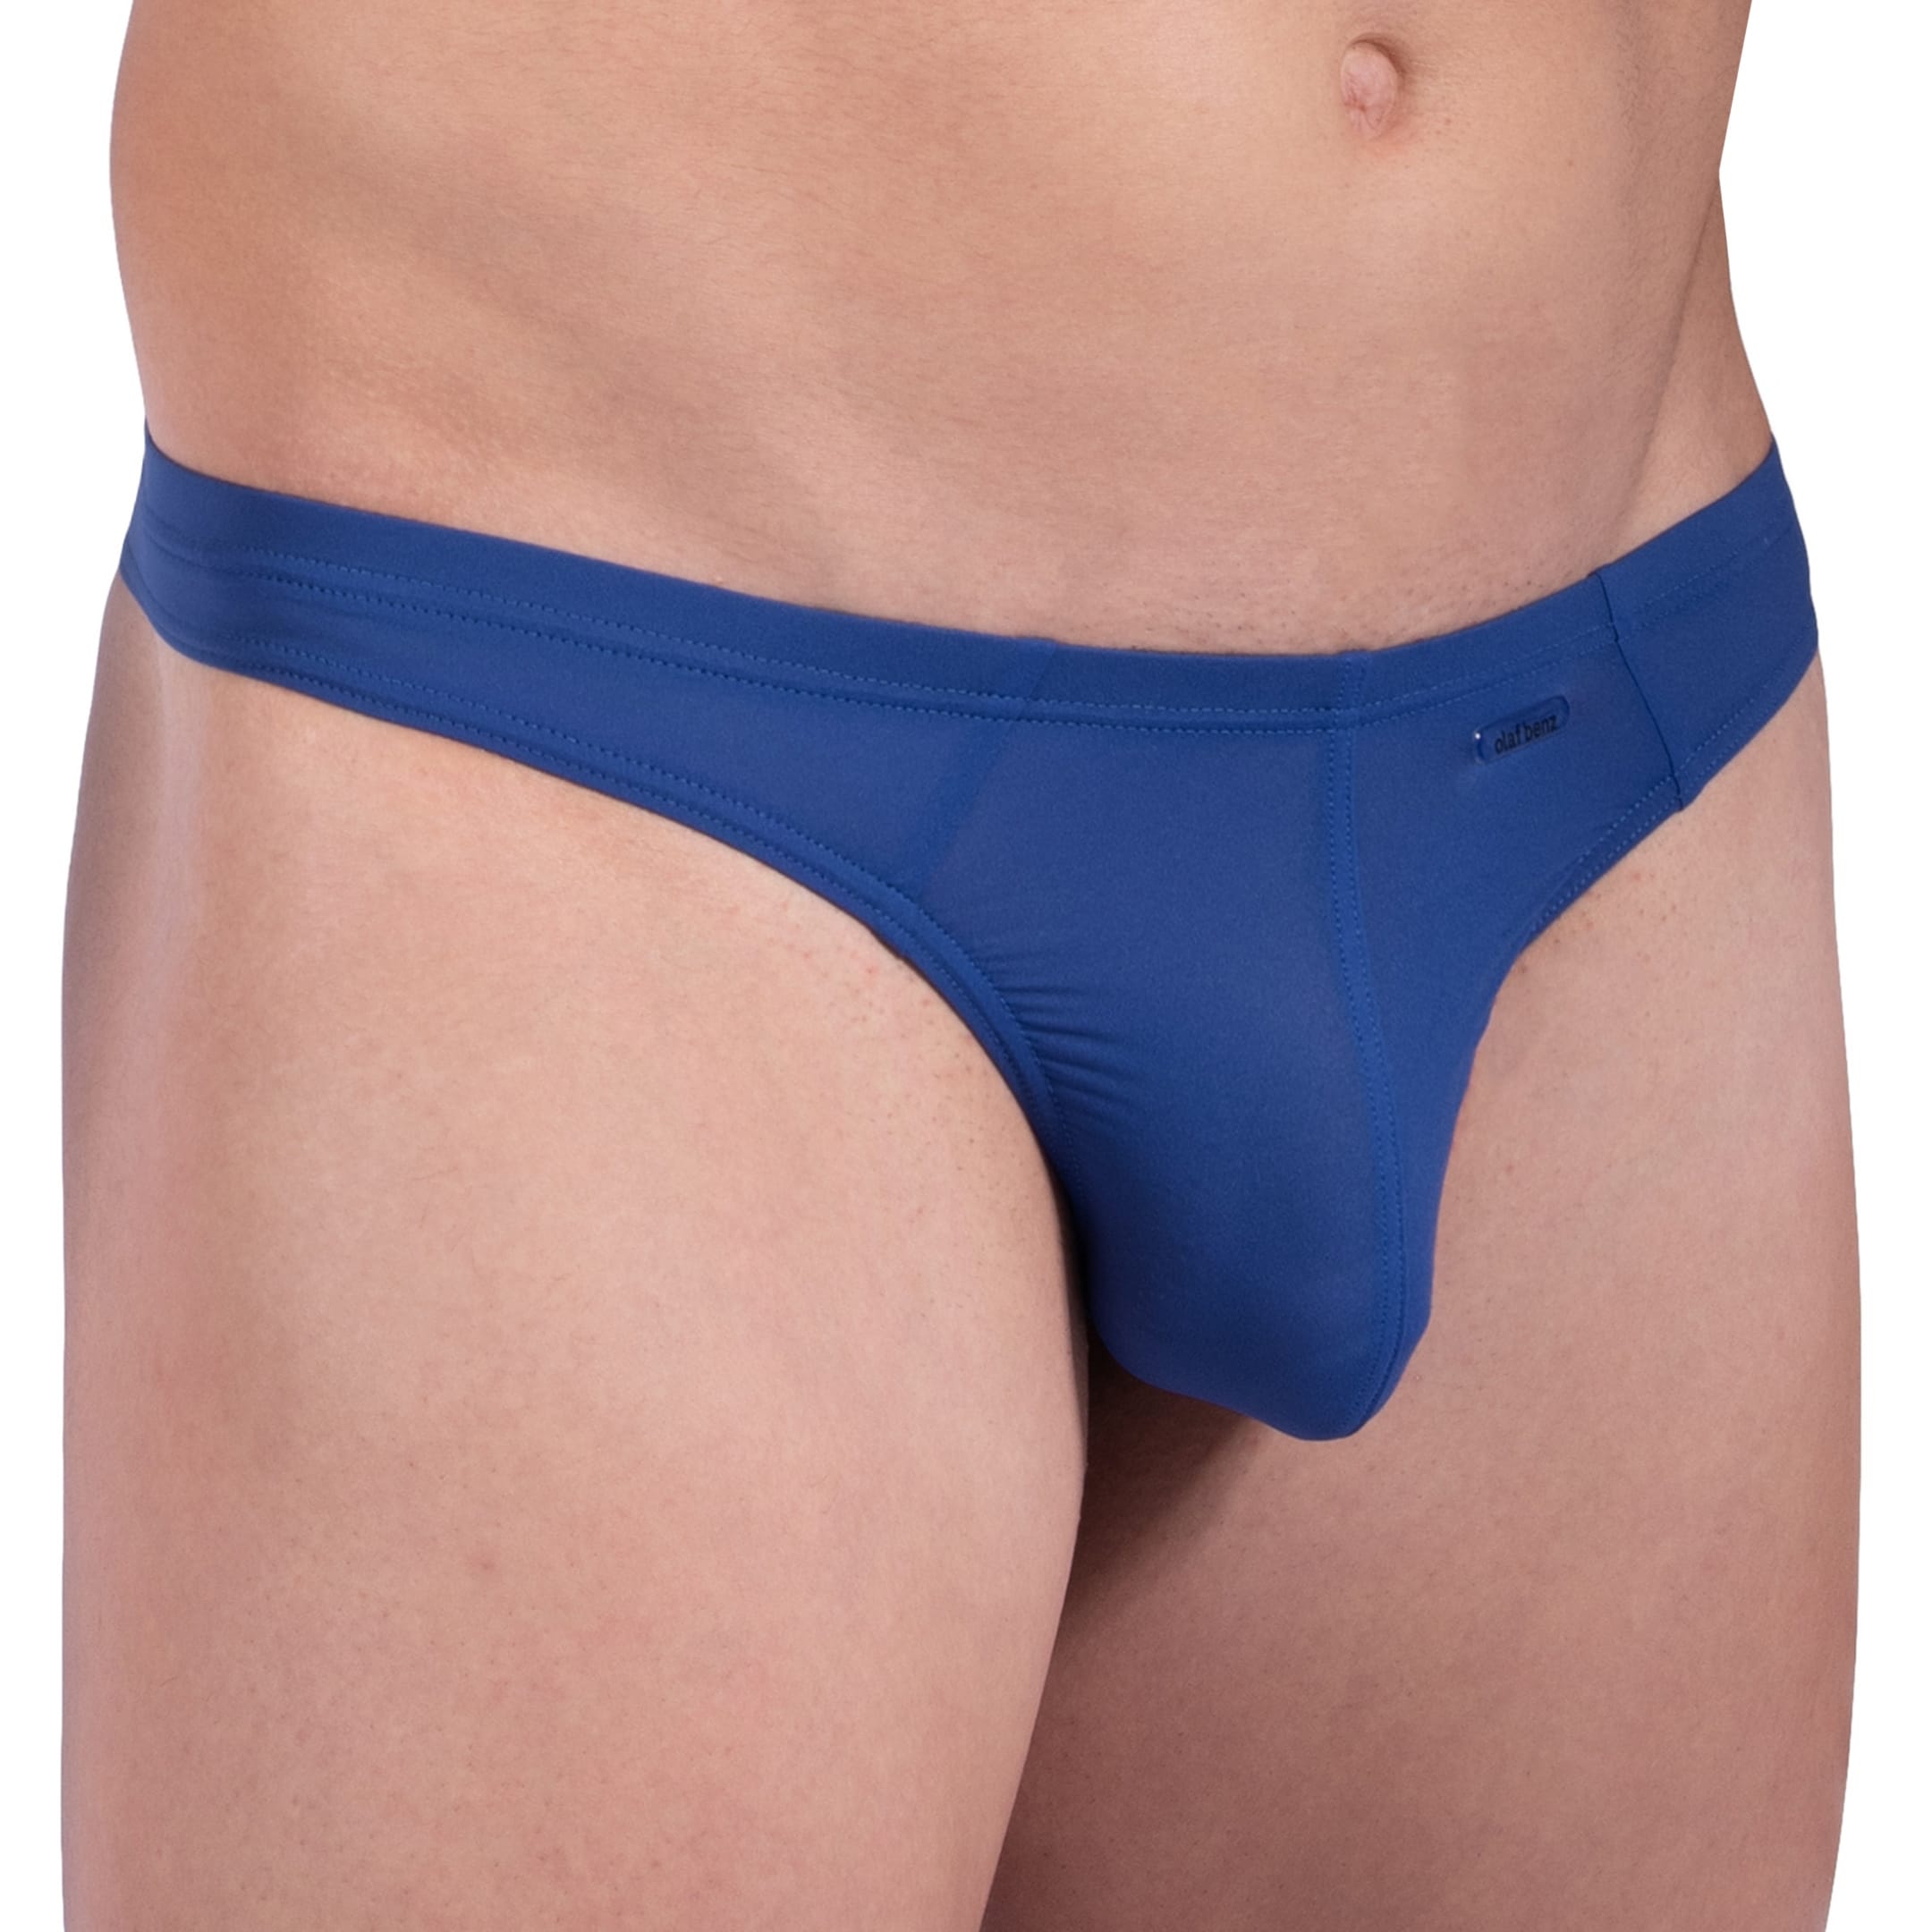 Olaf Benz RED 0965 Mini Thong - Navy